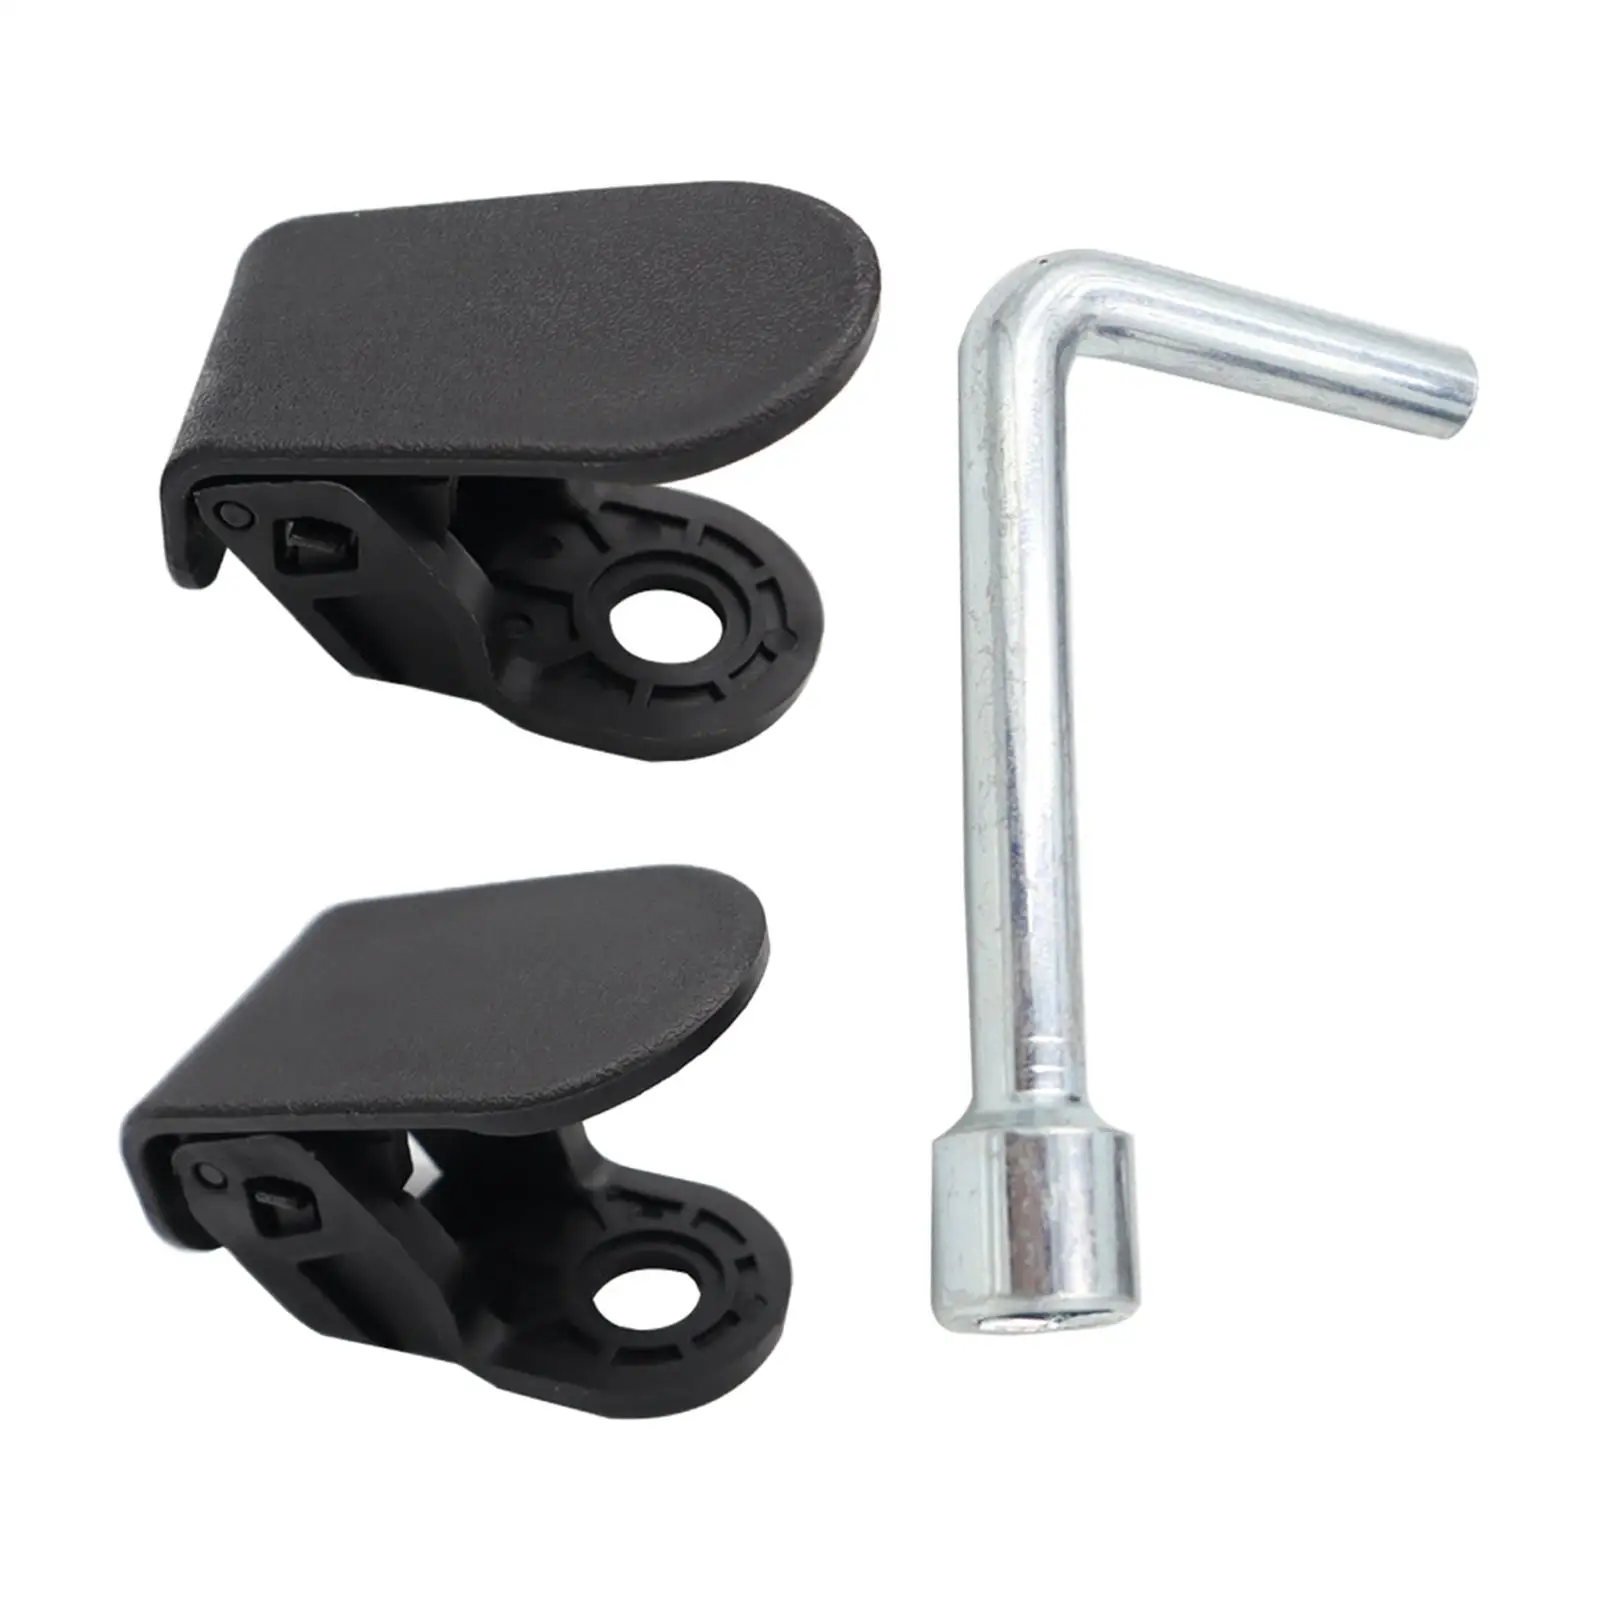 2Pcs Front Trunk Hook Concealed Bolt Covers Bag Hanger for Tesla Model 3 2019 2020 Easy to Install Accessories Professional